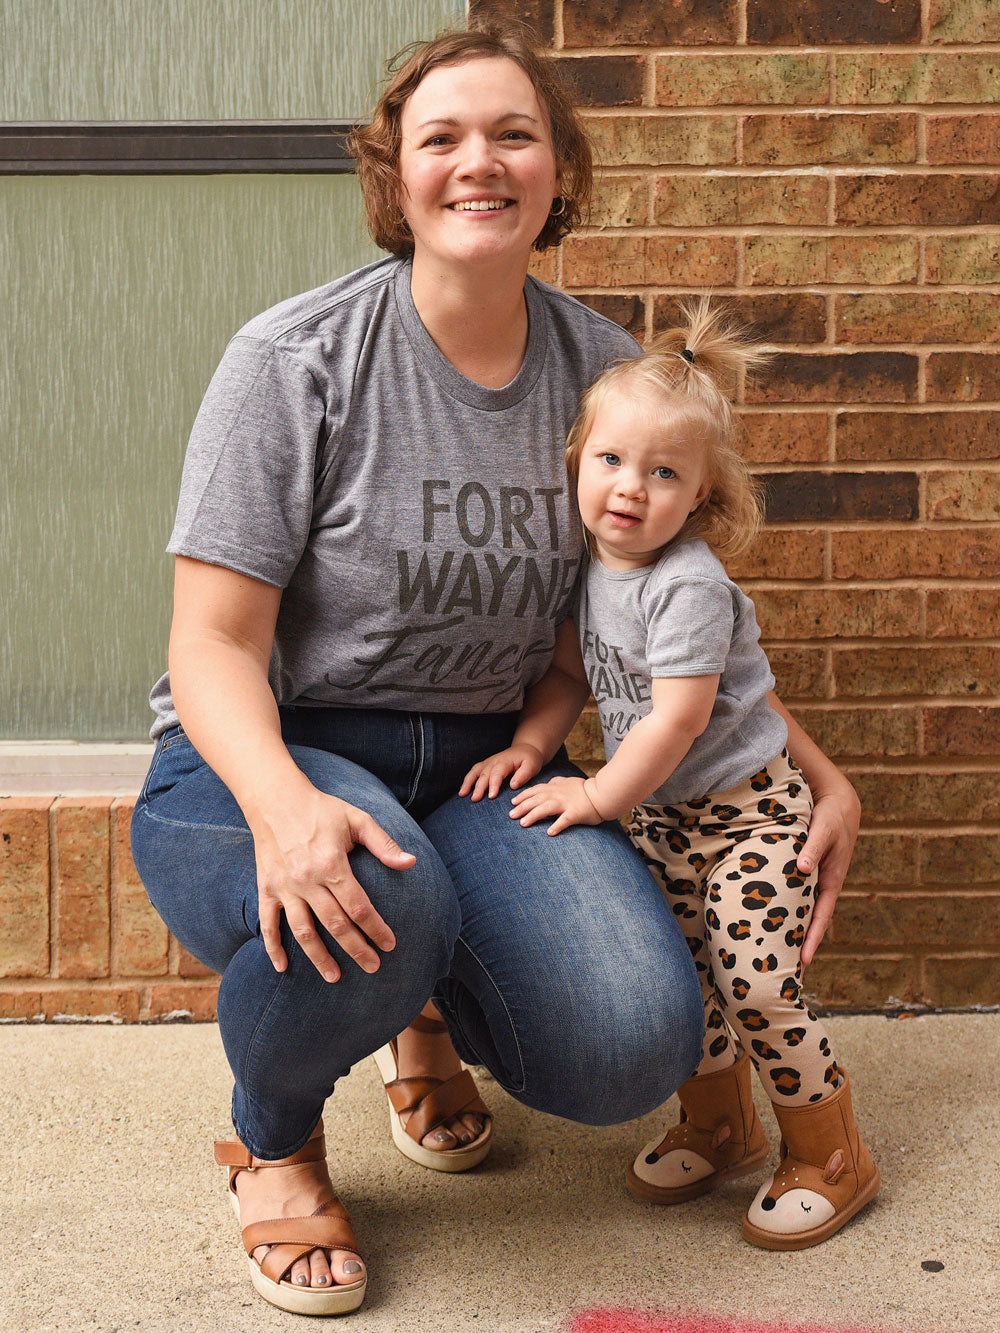 Fort Wayne Fancy gray heather t-shirt on model with daughter